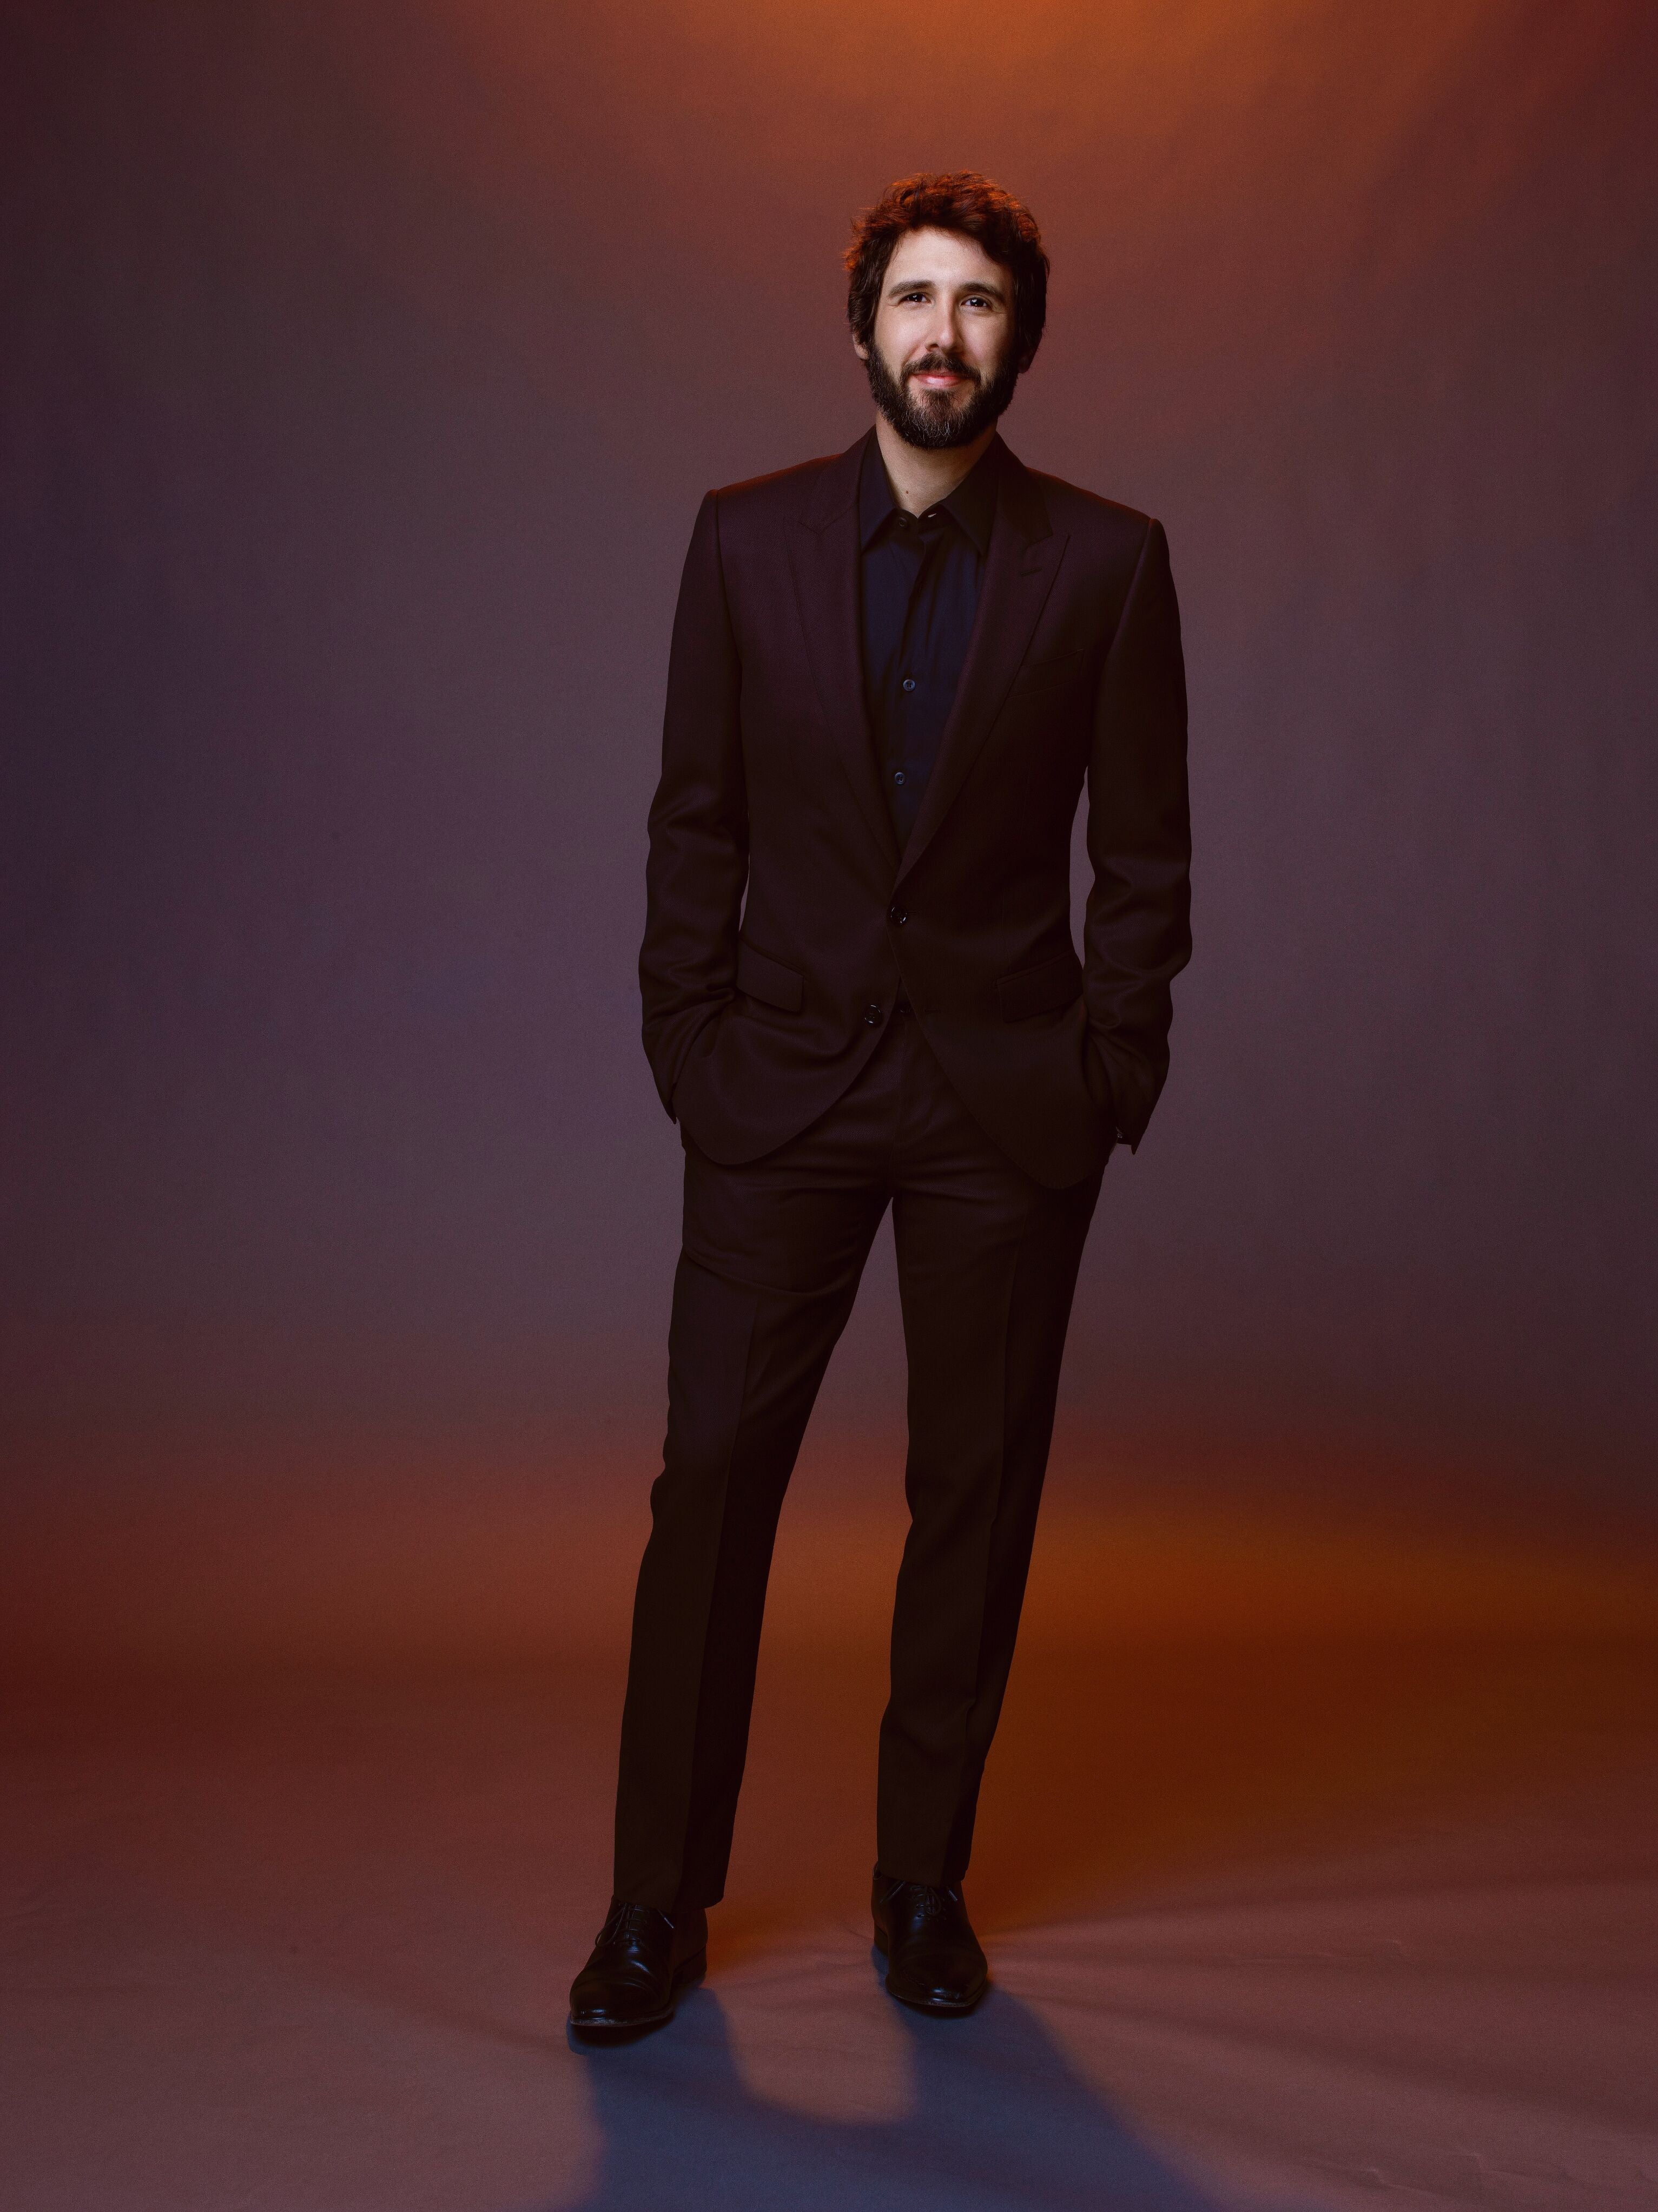 members only presale code to Josh Groban tickets in Lincoln